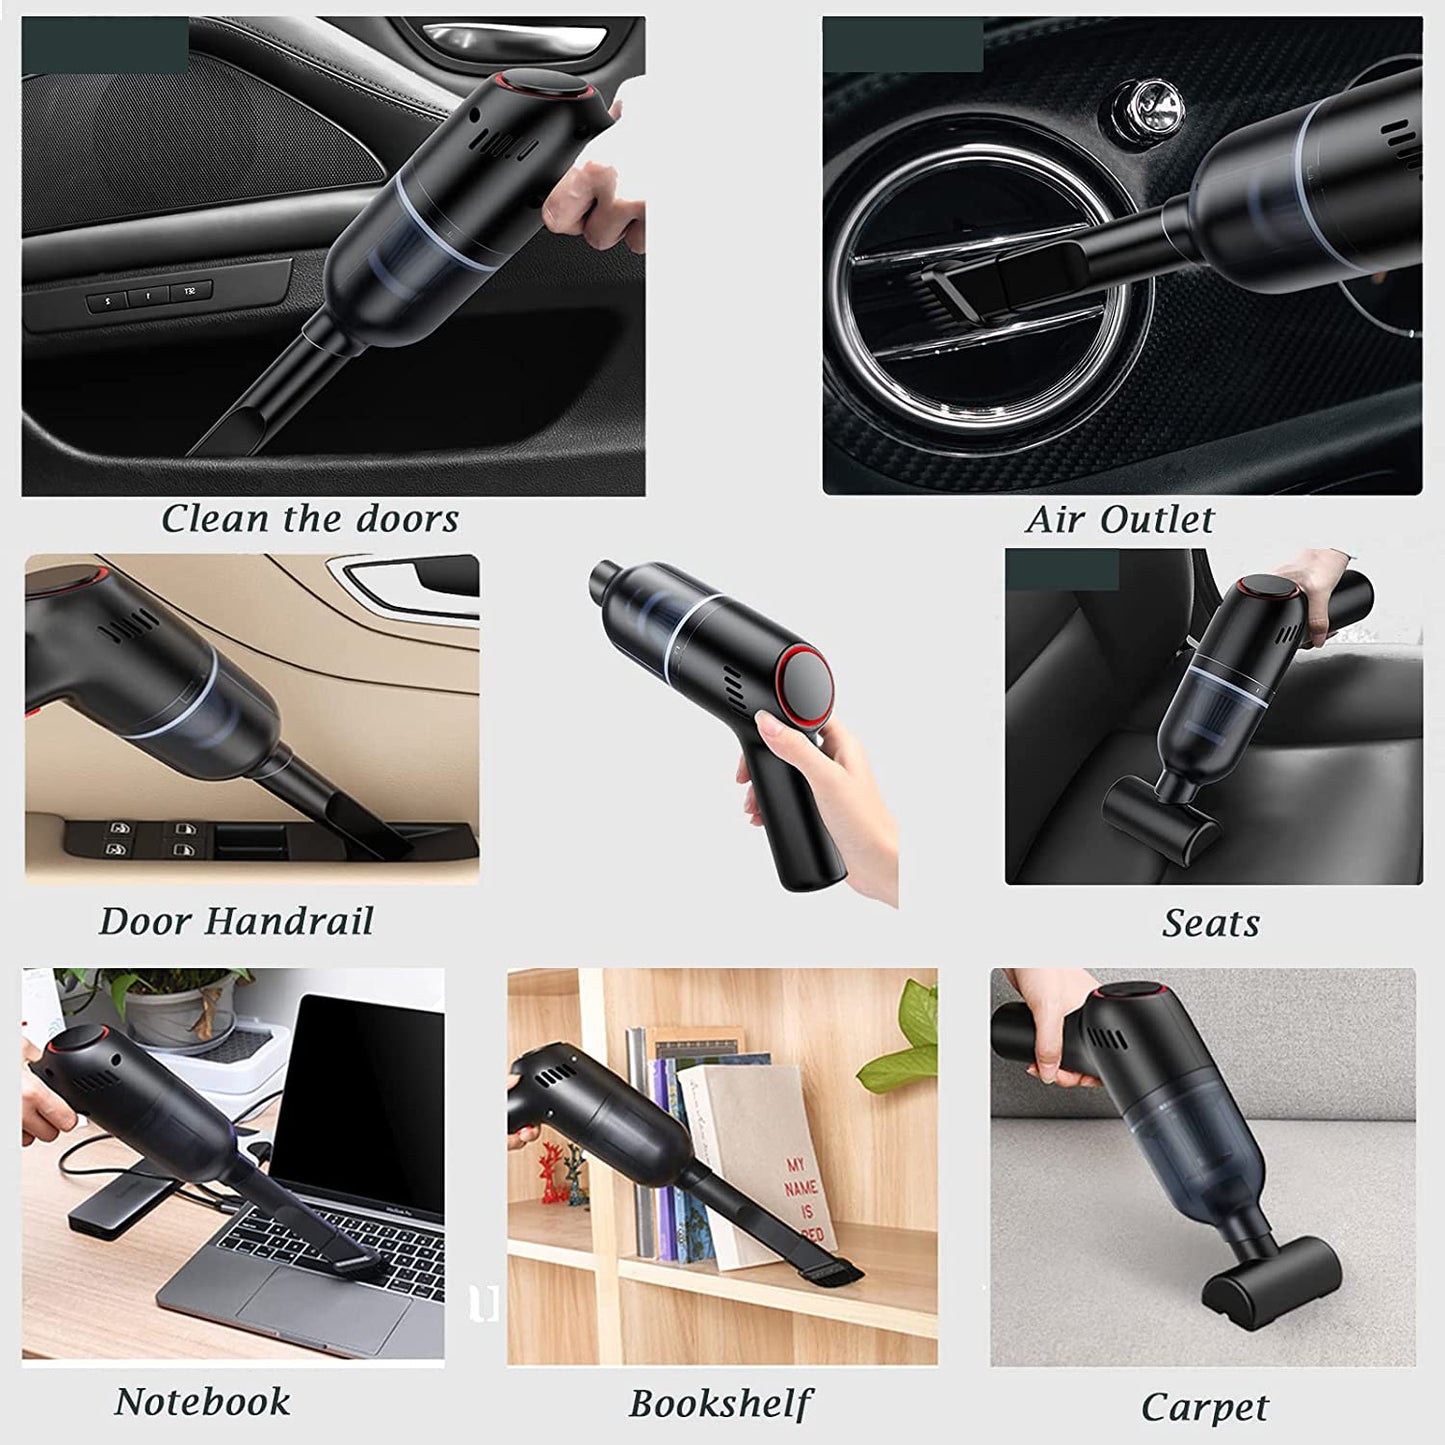 Cool Handheld Small Vacuum Cordless for Car-Home-Office Rechargeable Hand Vacuum, 120W/9000Pa Powerful Suction,Portable Dustbuster Mini Detailing and Cleaning Car Interior,Cleaning Brush&Storage Bag